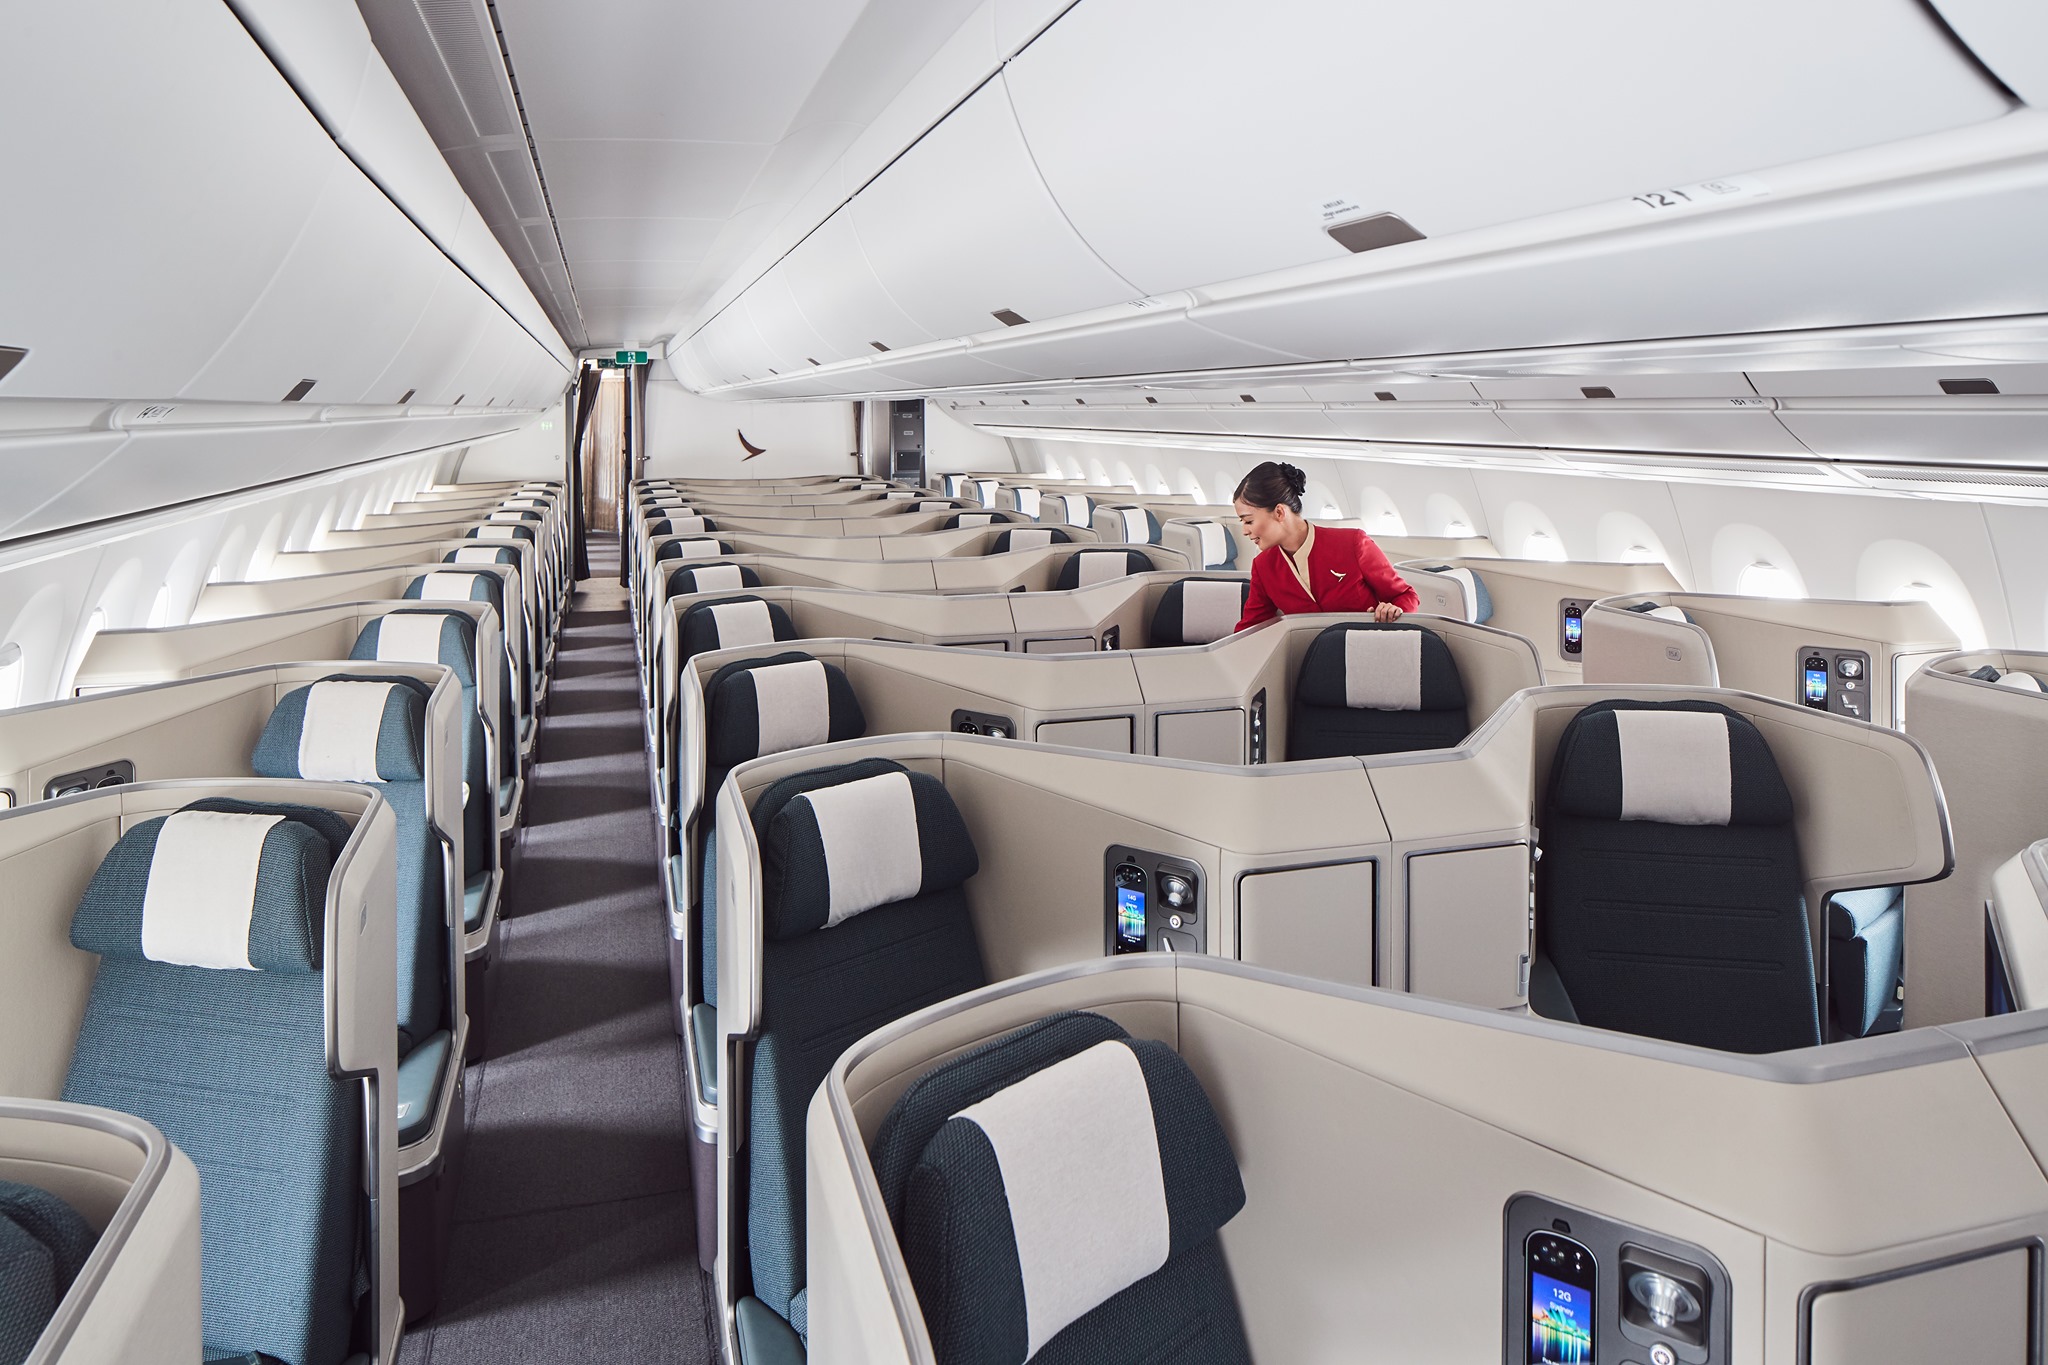 As the world returns to the skies, Nick Walton enjoys the return to regular service on Cathay Pacific on a flight between Hong Kong and the Indonesian capital